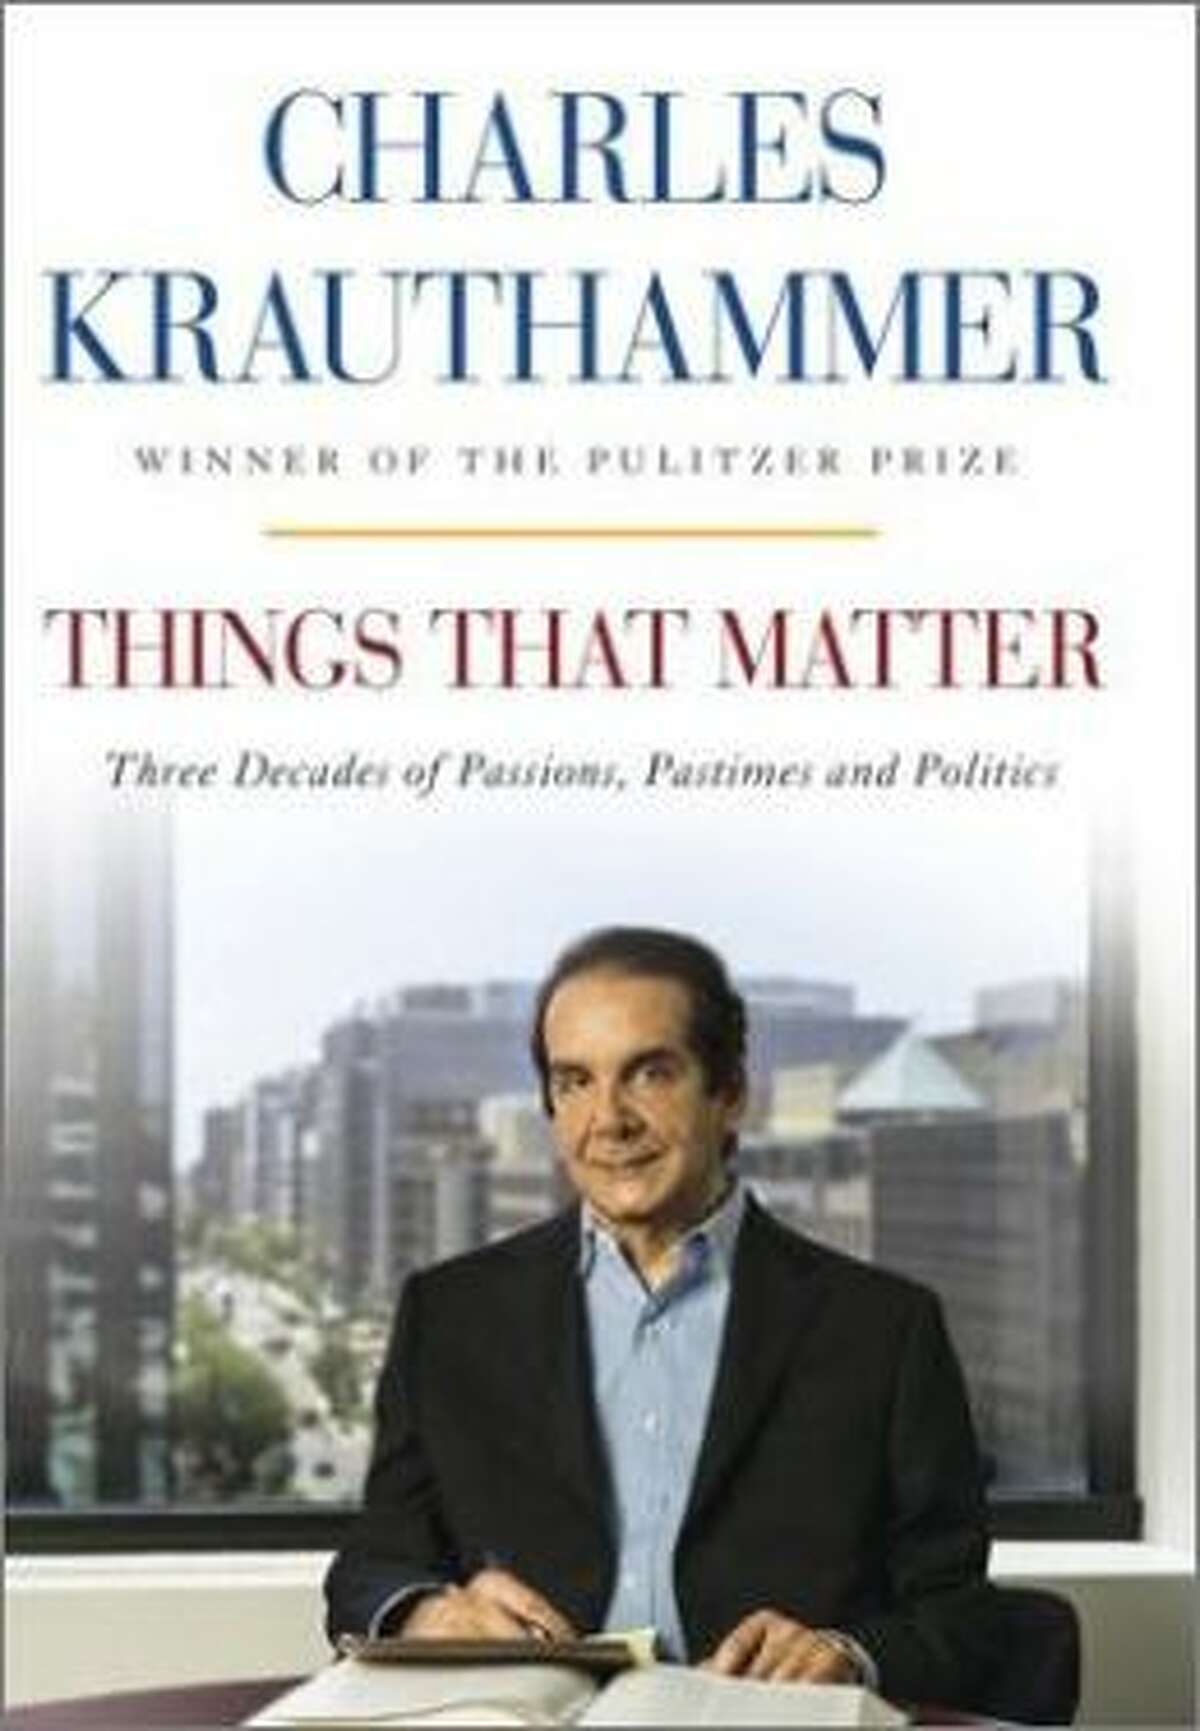 "Things That Matter" by Charles Krauthammer